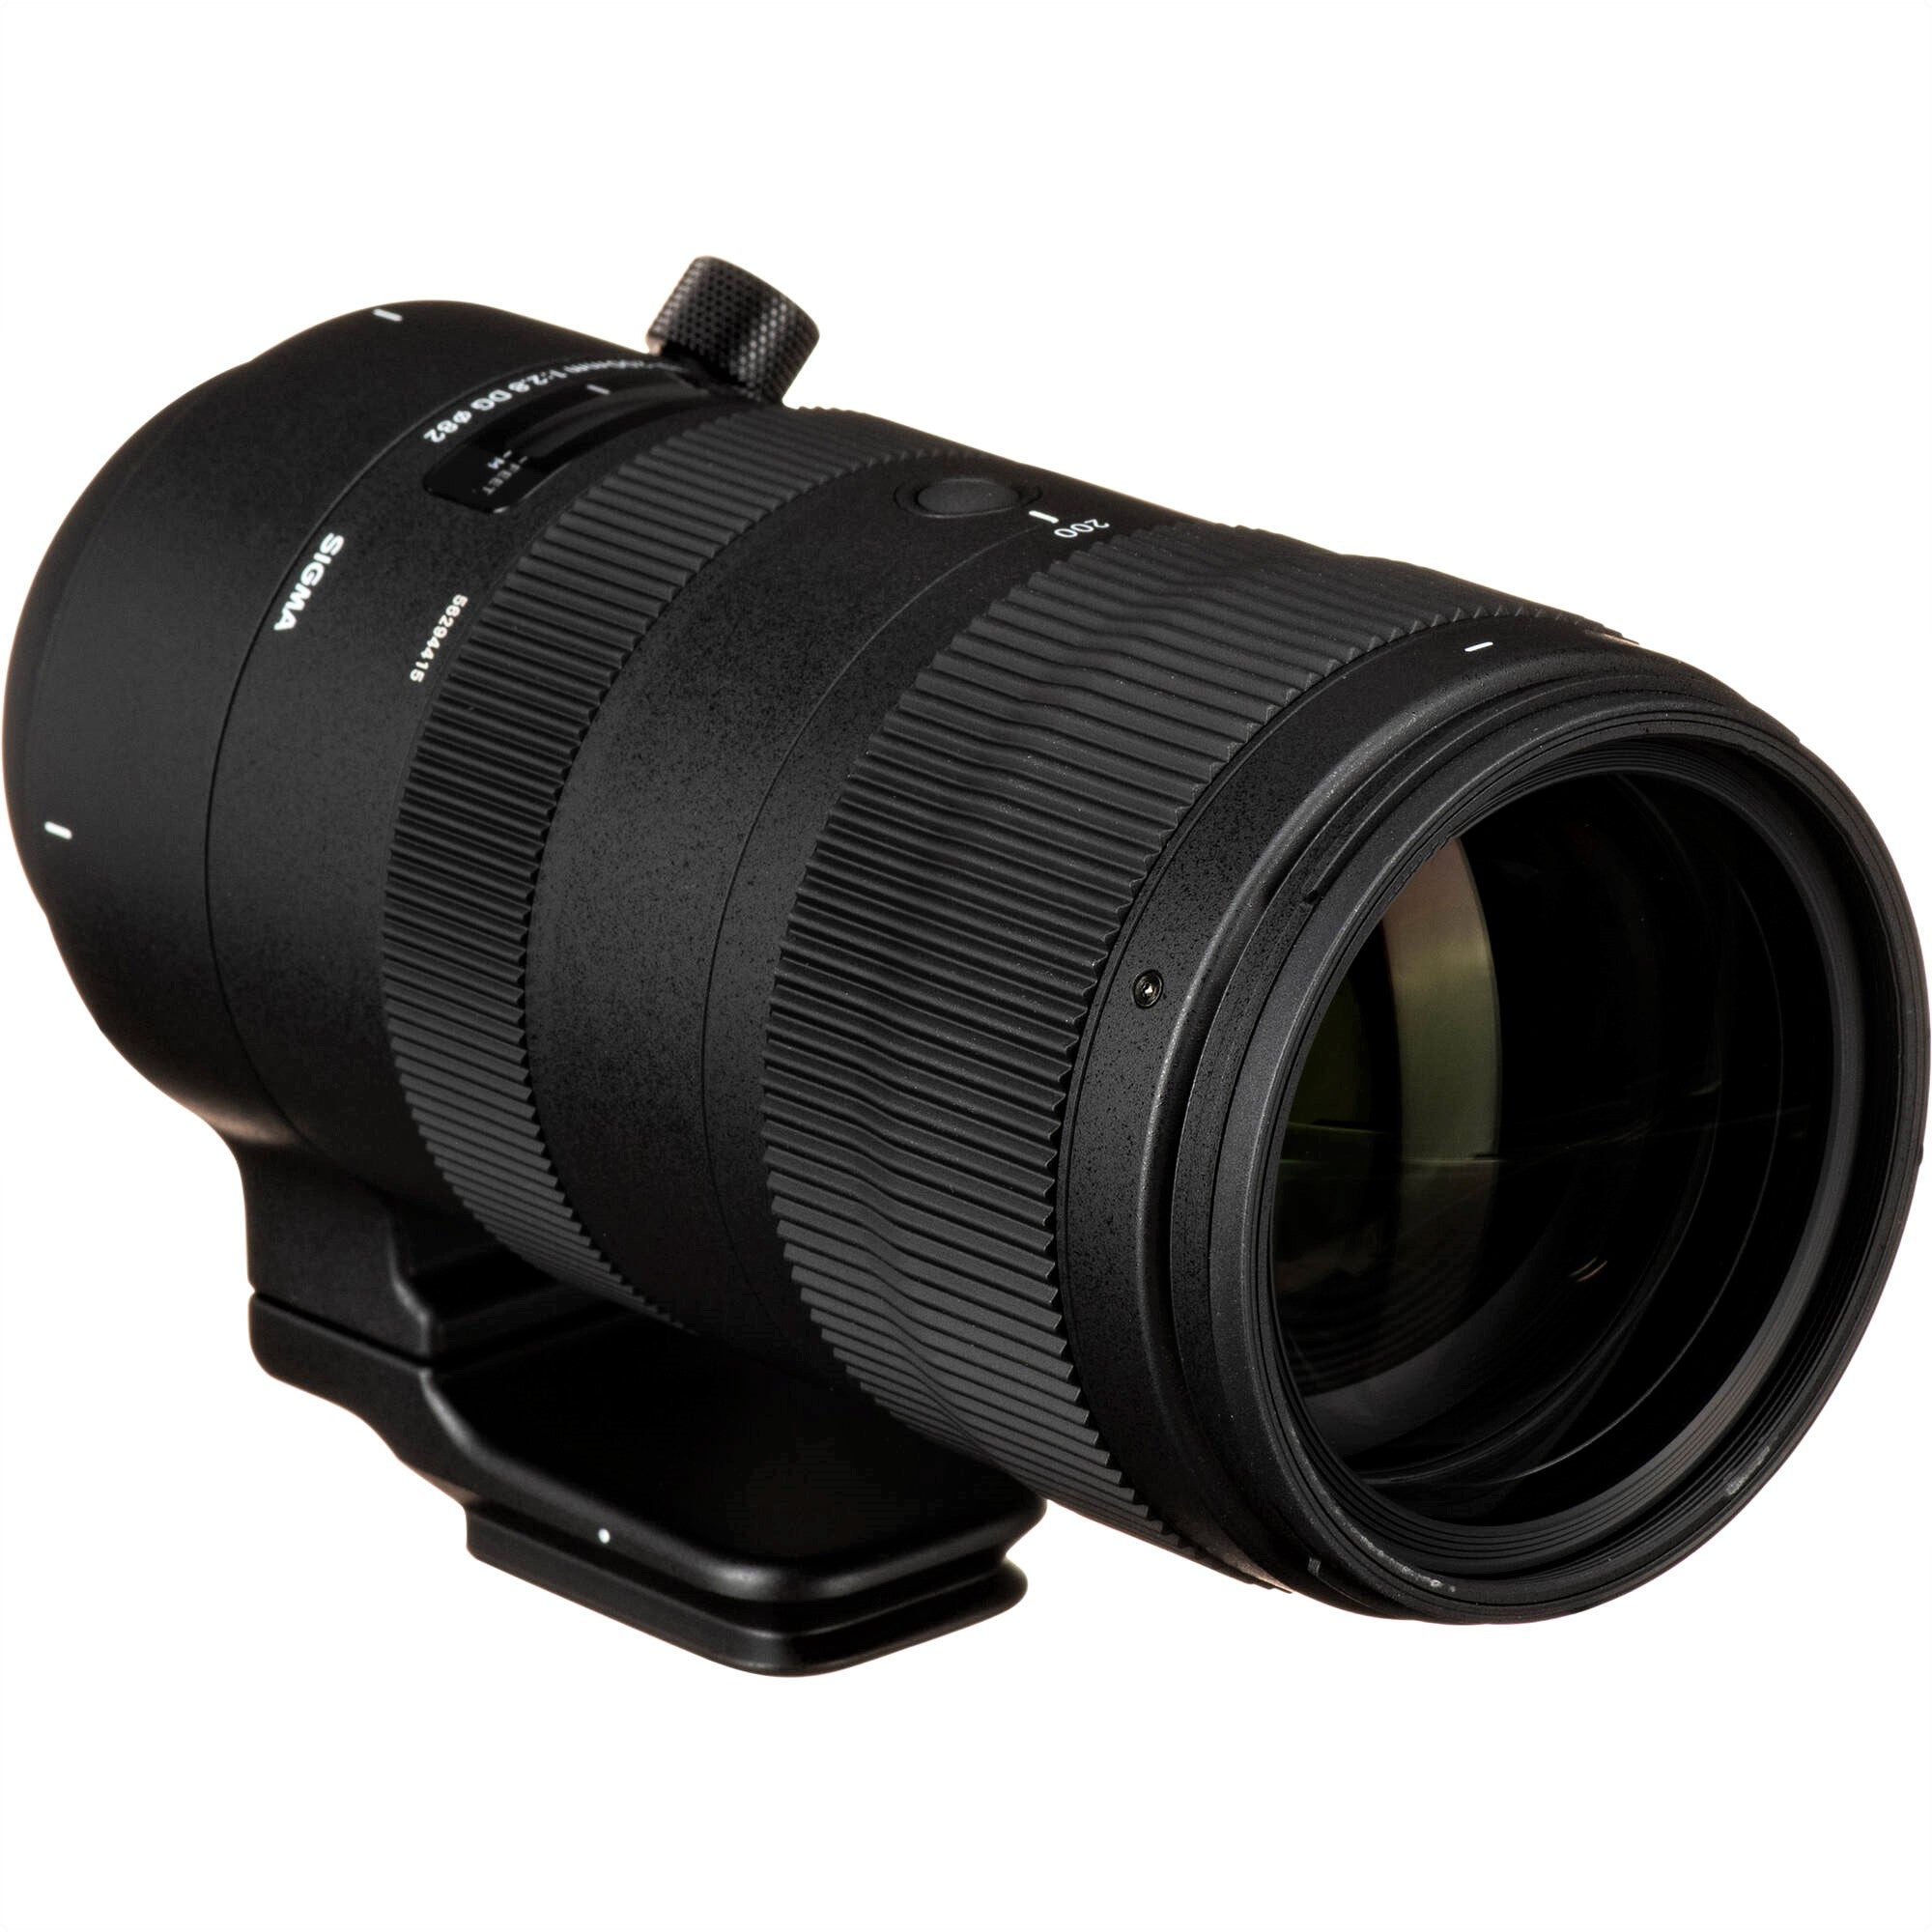 Sigma 70-200mm F2.8 DG OS HSM Sports Lens (Nikon F Mount) in a Front-Side View